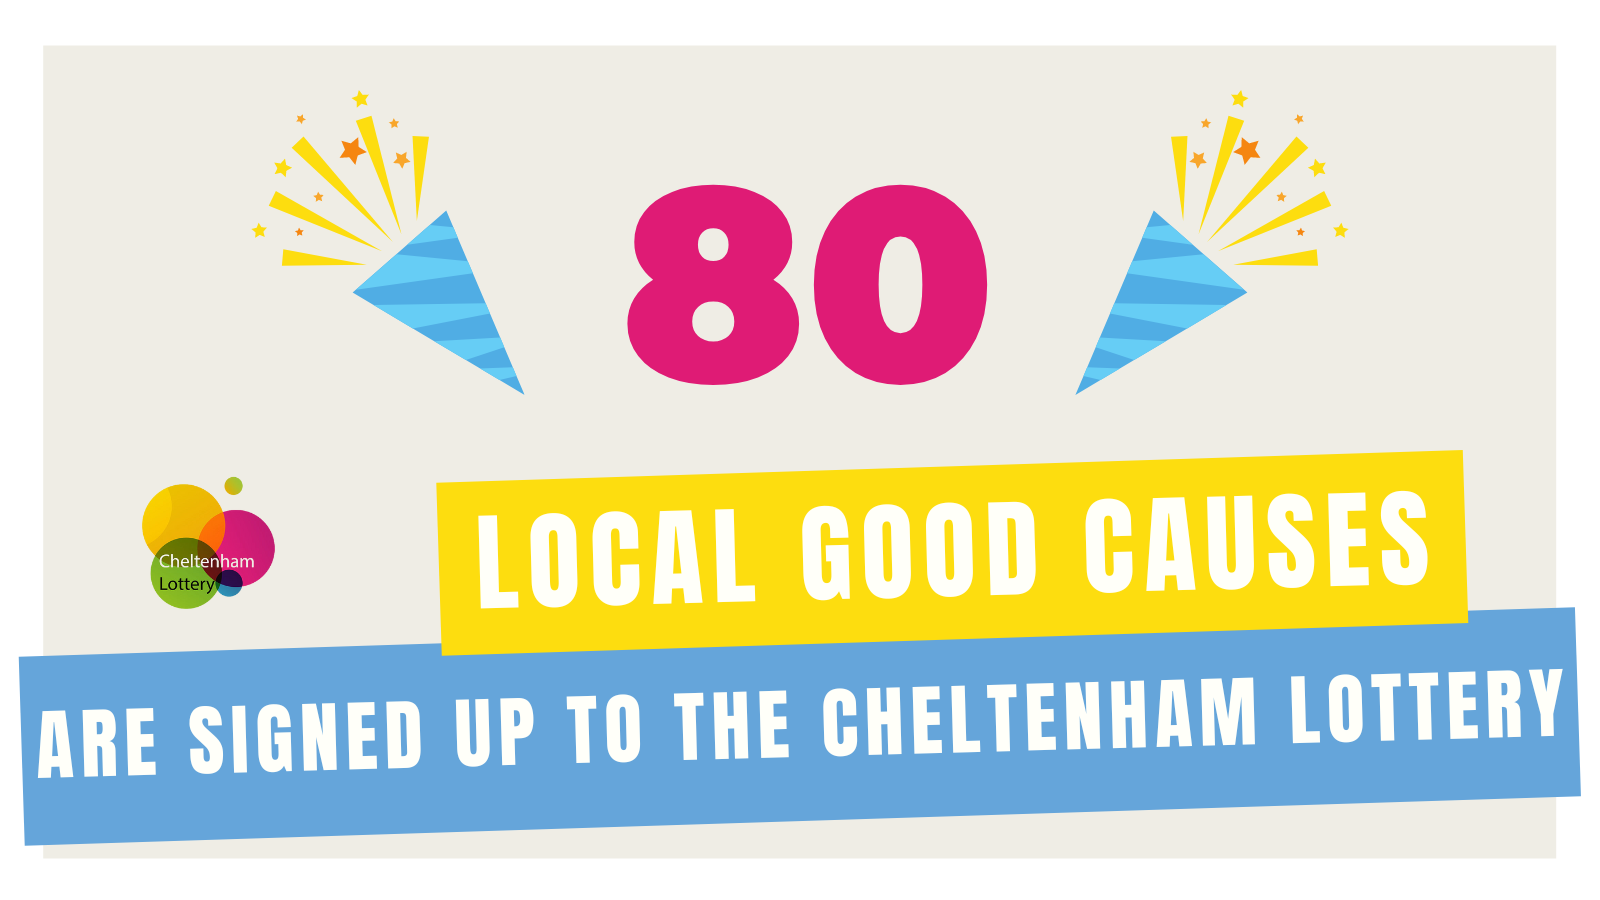 80 local good causes are signed up to the Cheltenham Lottery